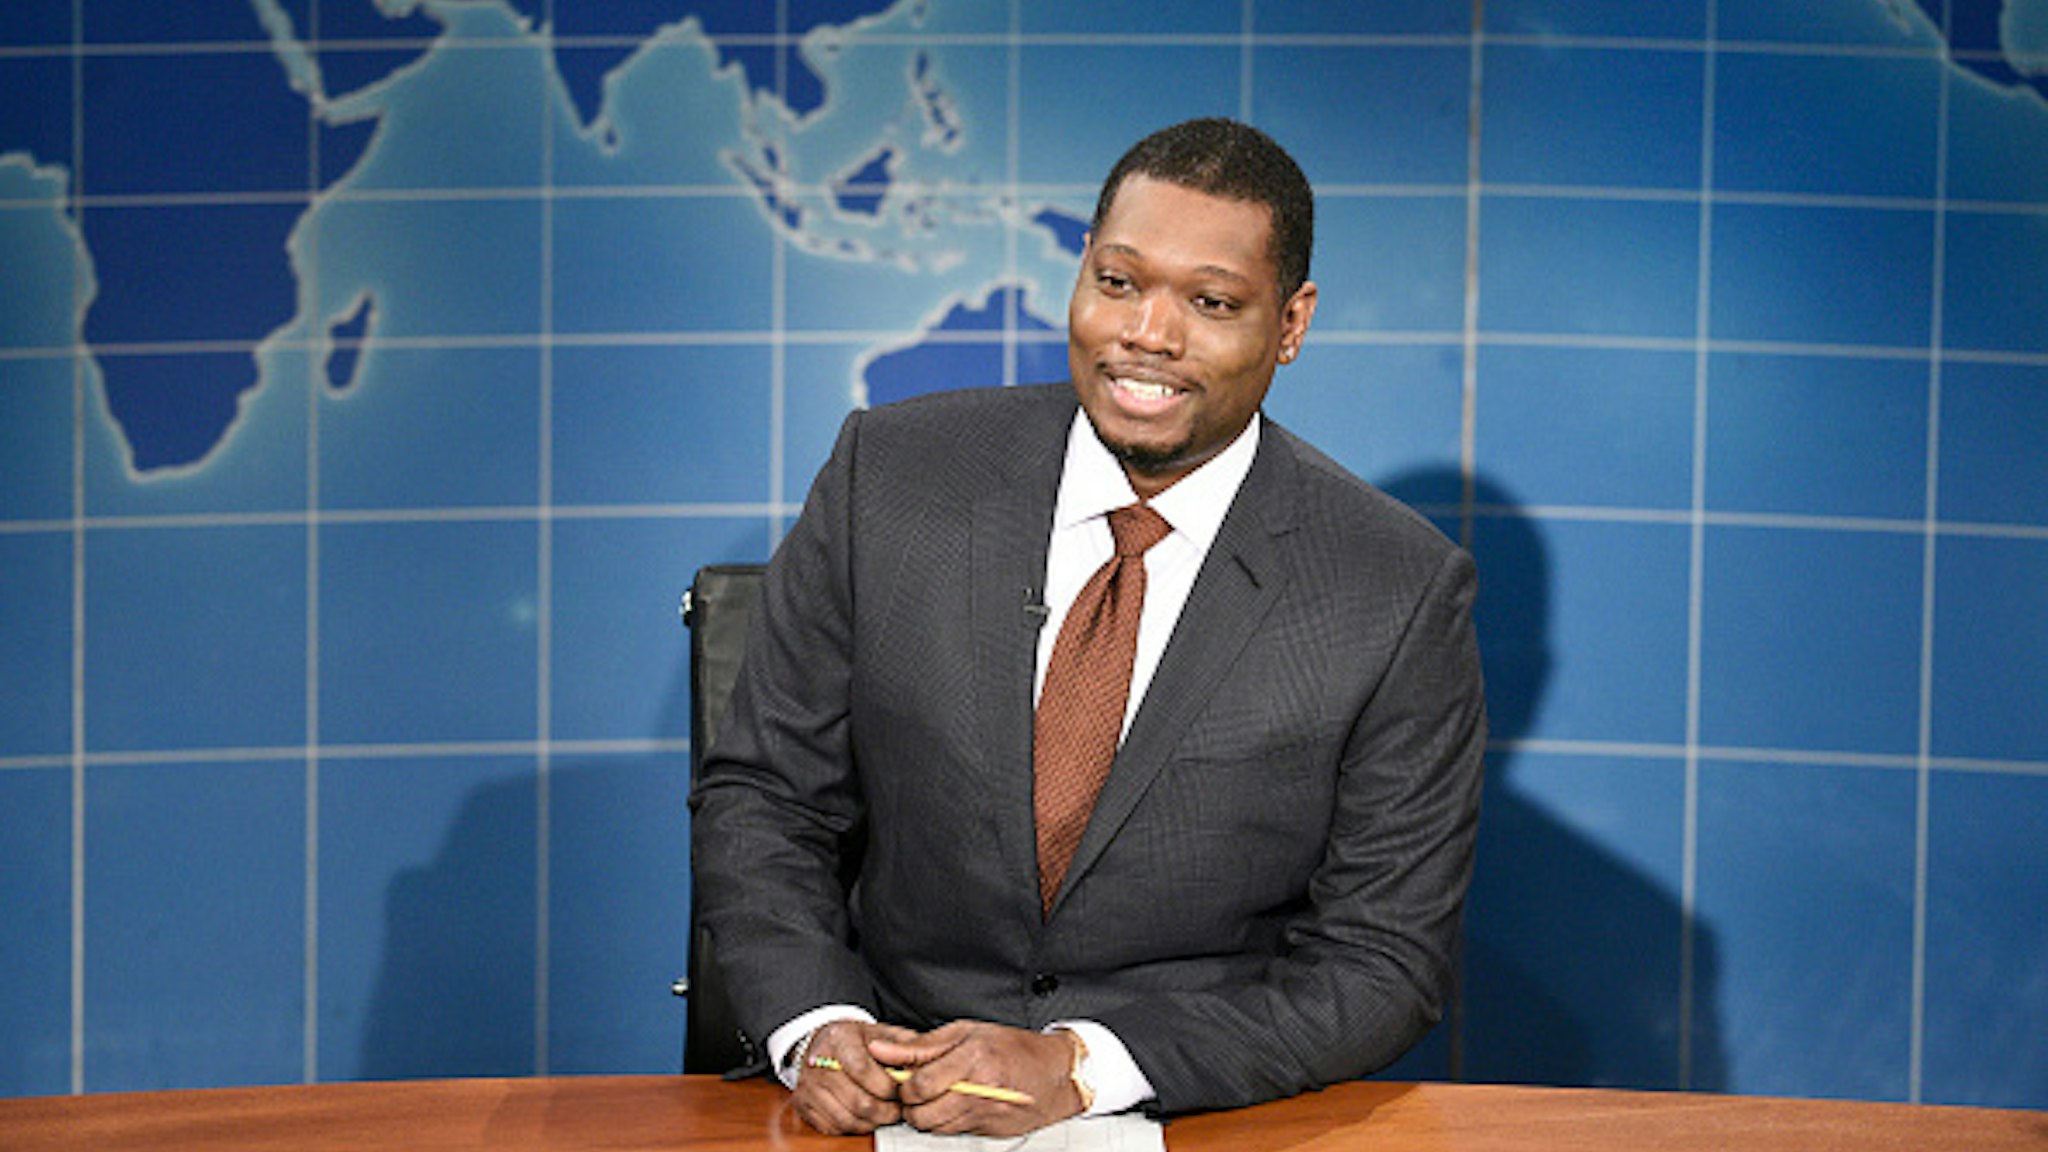 SATURDAY NIGHT LIVE -- "John Mulaney" Episode 1790 -- Pictured: Anchor Michael Che during Weekend Update on Saturday, October 31, 2020